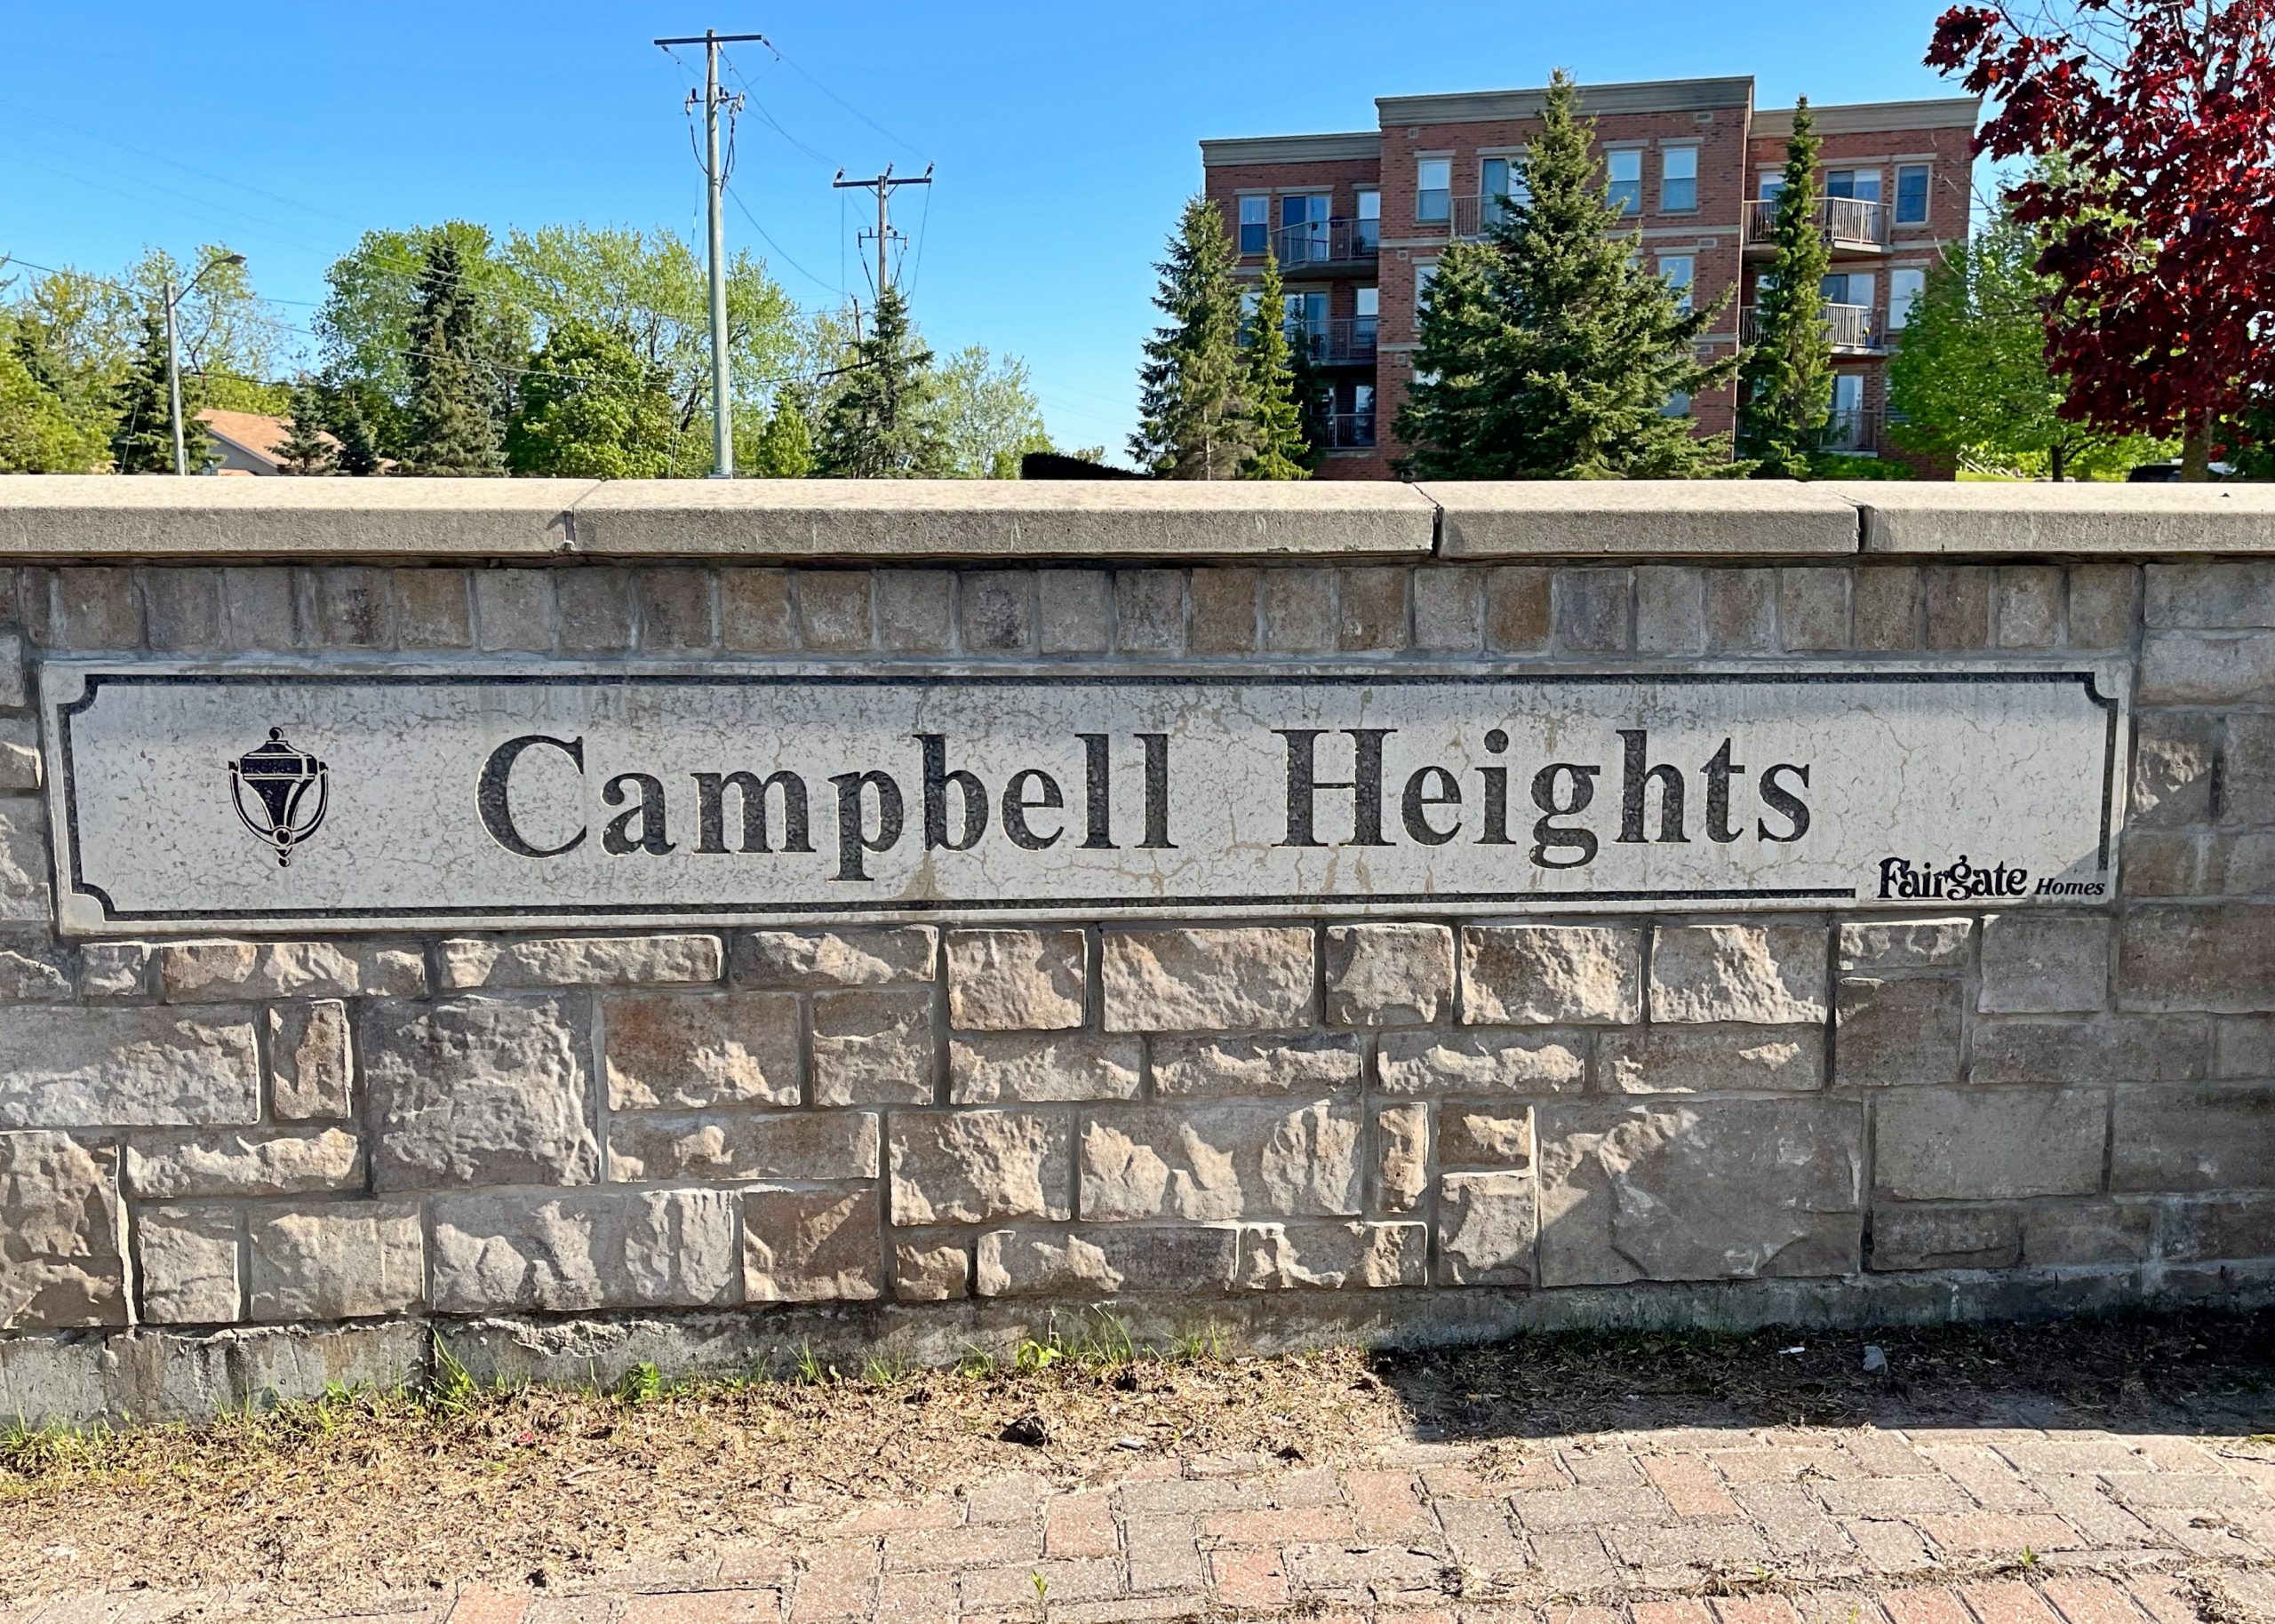 Campbell Heights